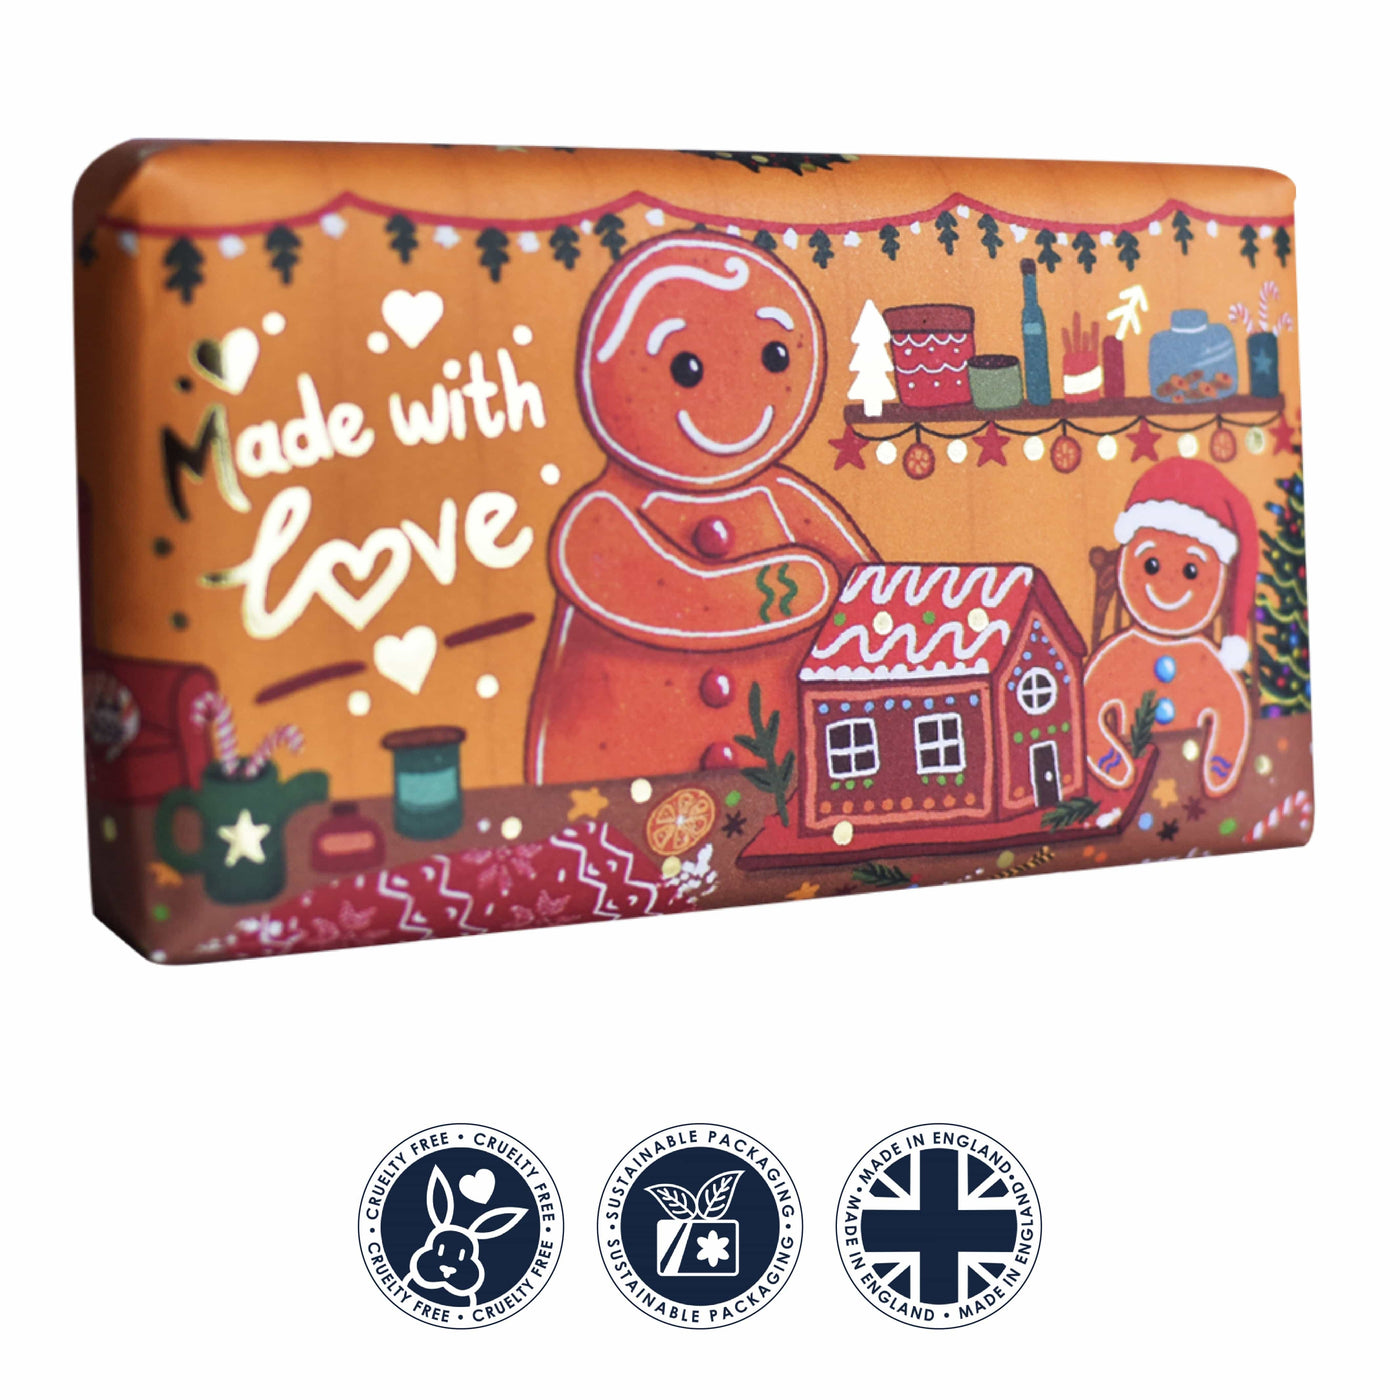 Cinnamon & Orange Gingerbread Man Christmas Soap Bar from our Luxury Bar Soap collection by The English Soap Company